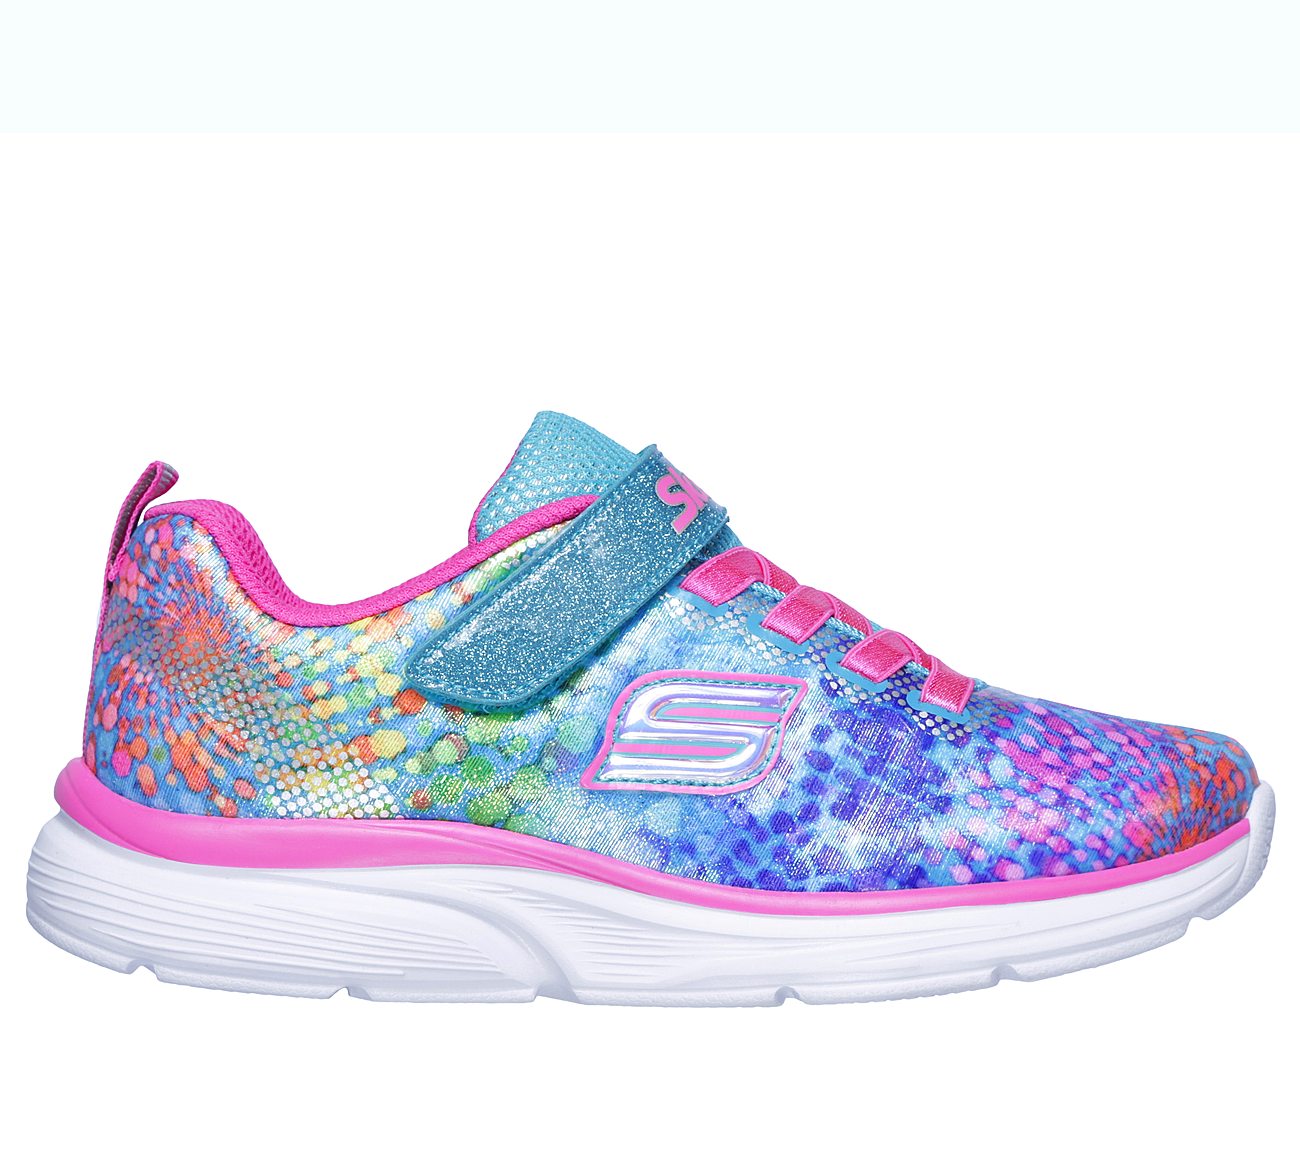 SKECHERS Wavy Lites Lace-Up Sneakers Shoes